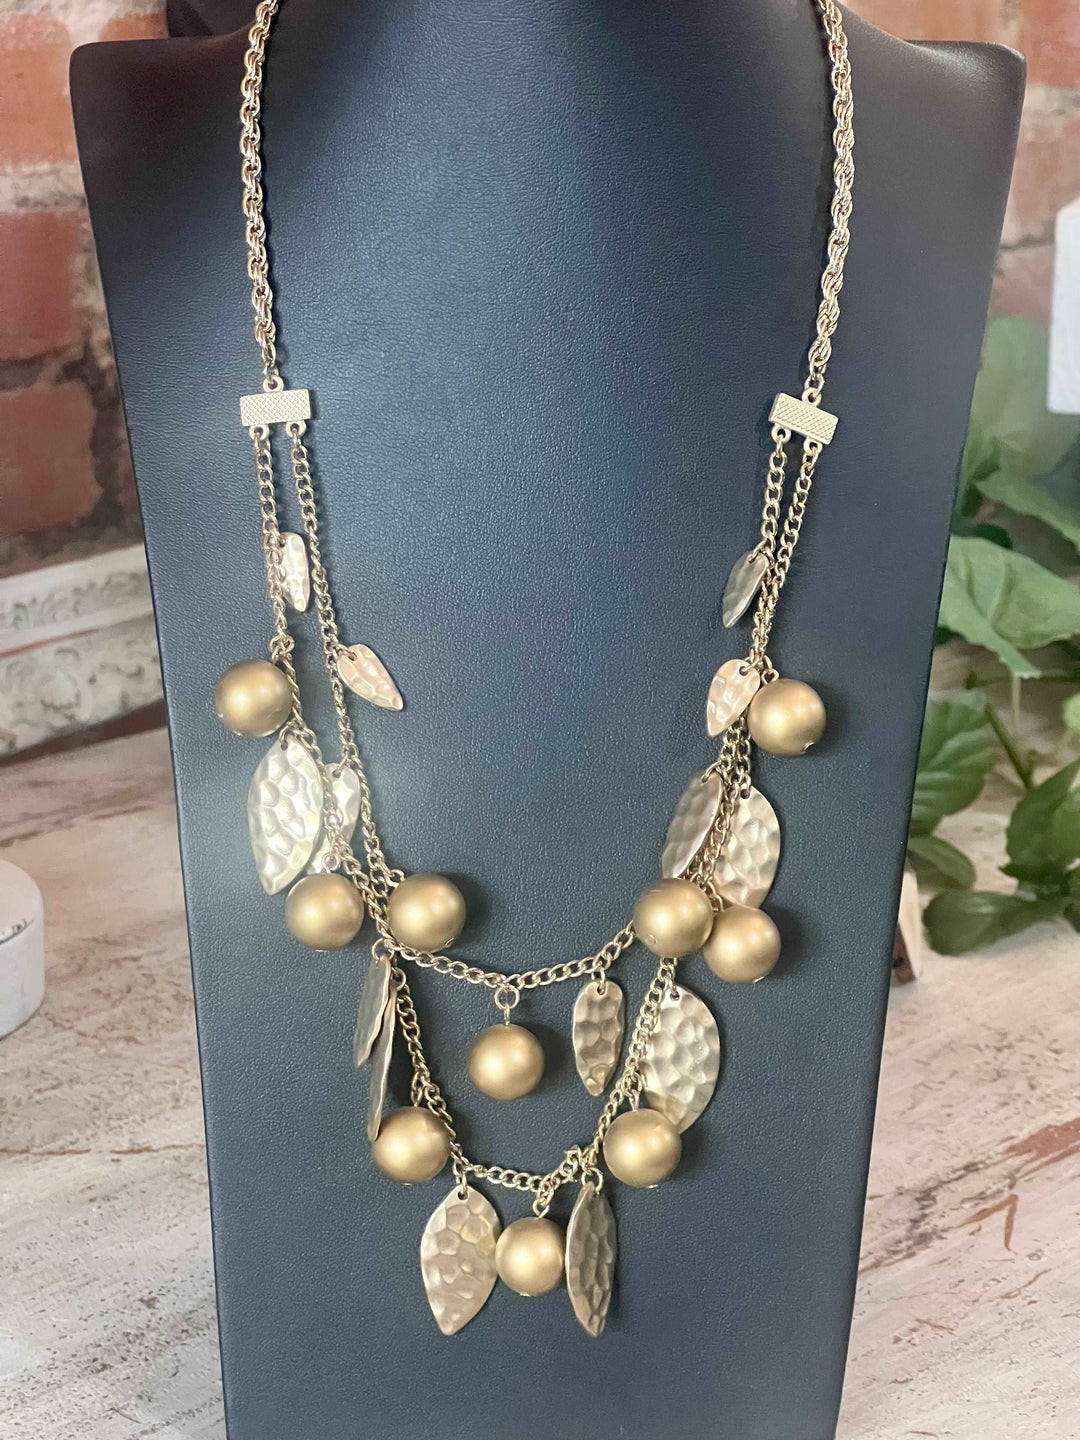 Gold Double Chain w/Matt Leaf ad Ball Charm Necklace